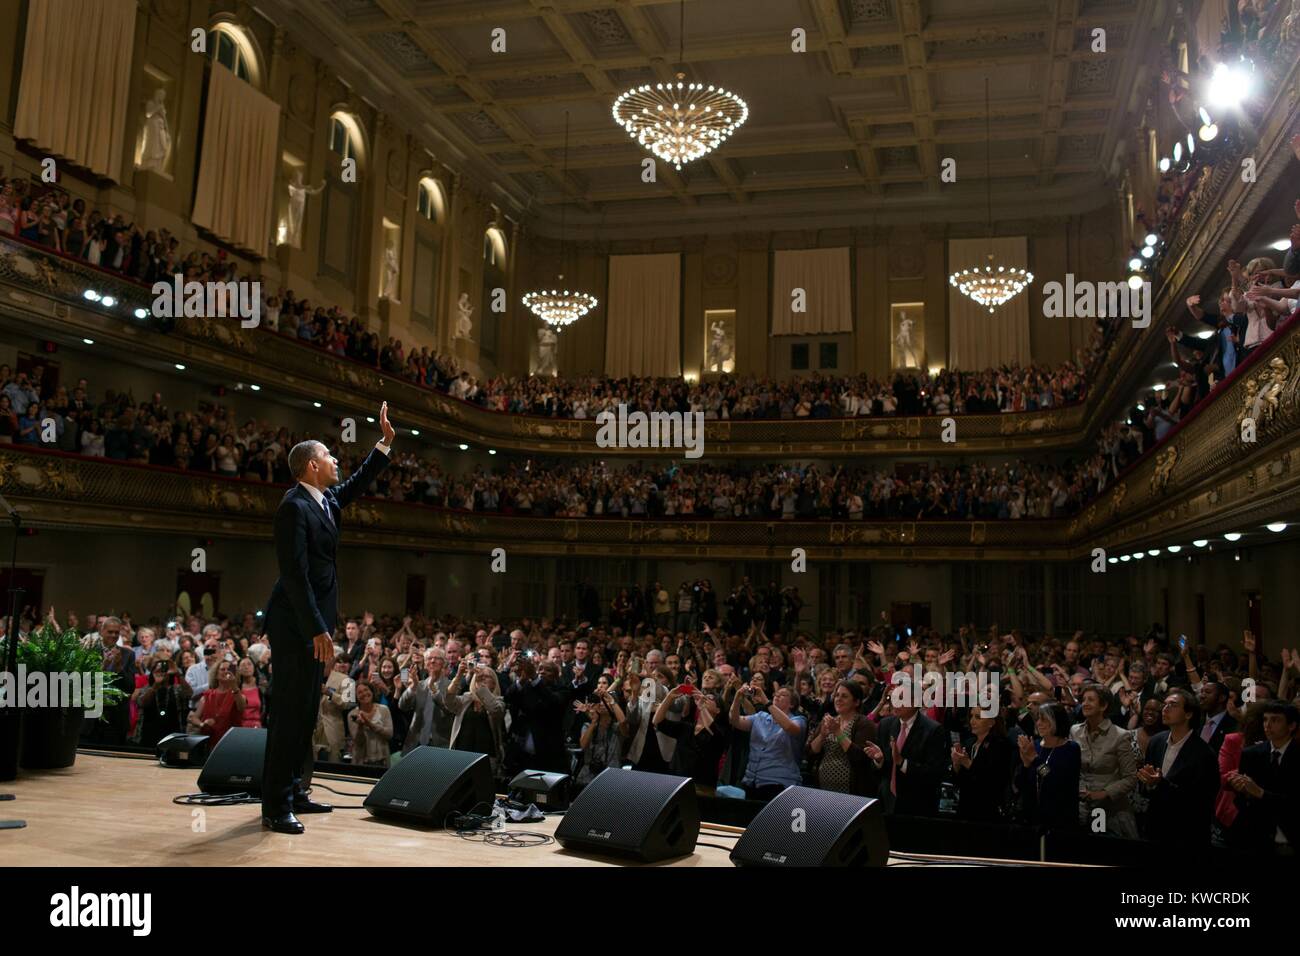 President Barack Obama waves to the audience after speaking at Symphony Hall, Boston. June 25, 2012. (BSLOC 2015 3 19) Stock Photo